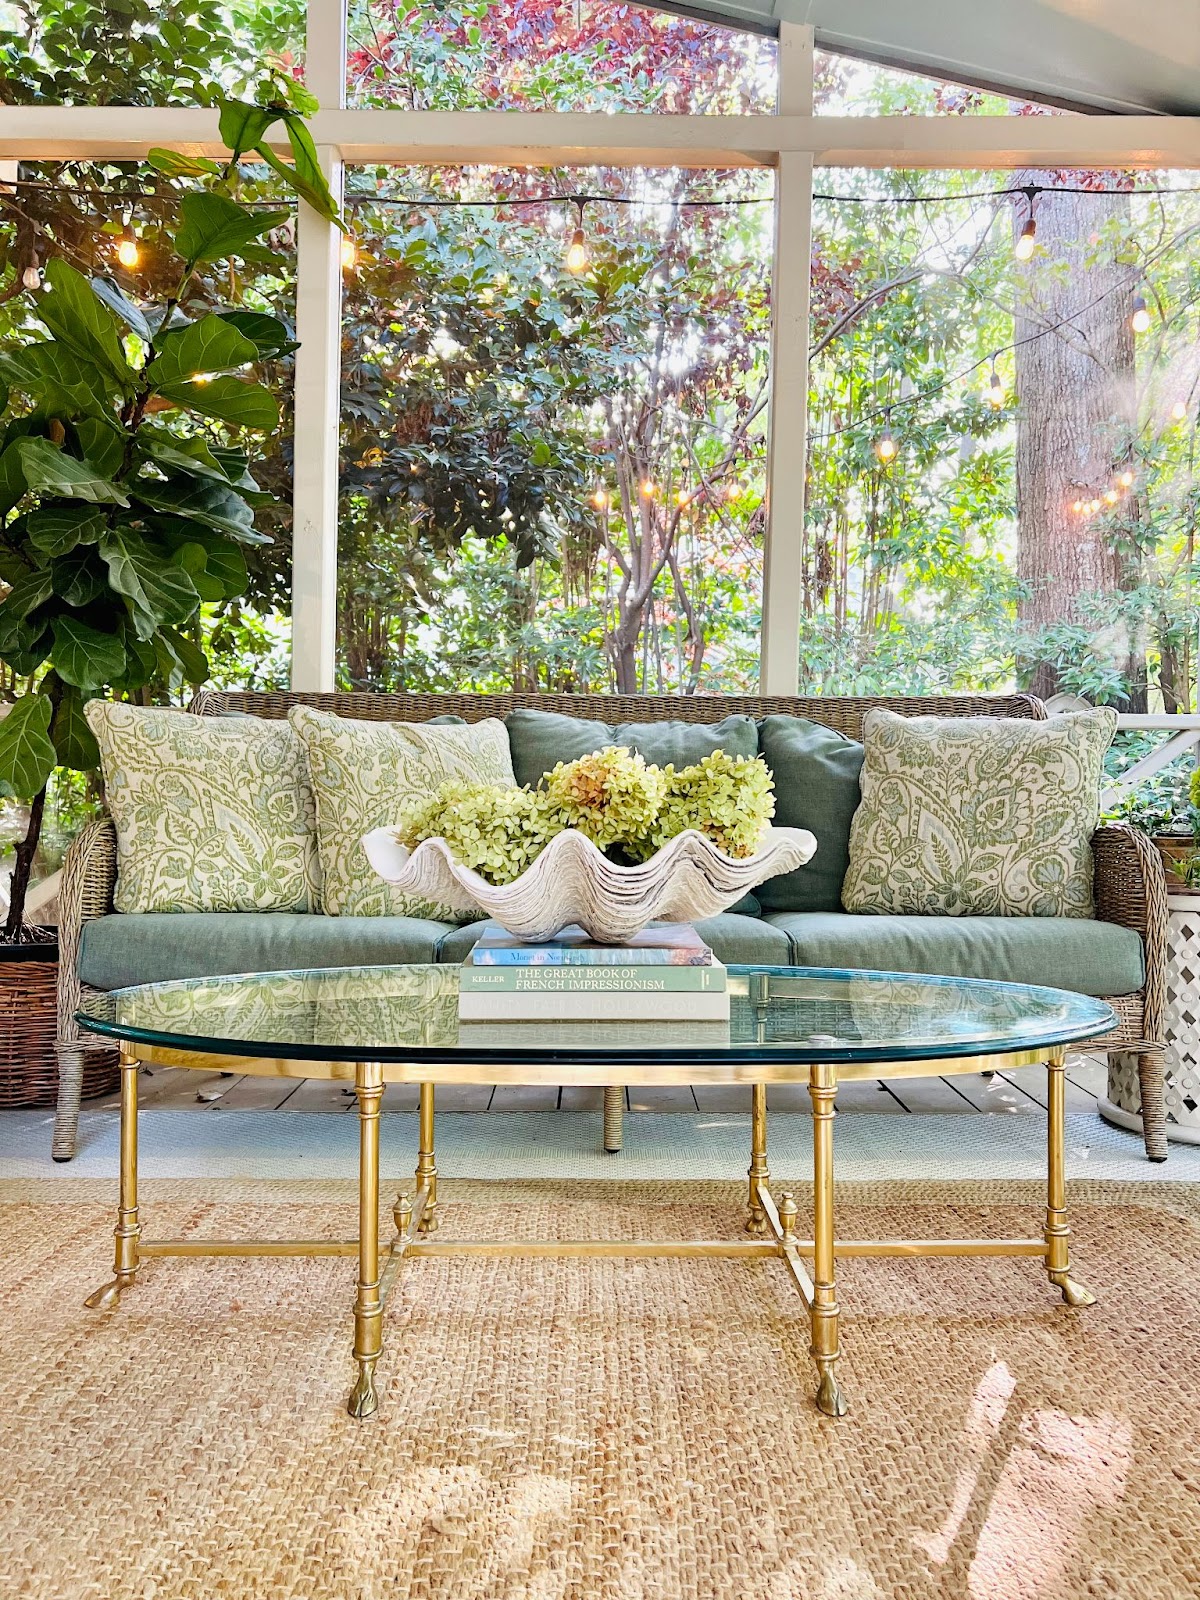 A beautiful sunroom adorned with a cozy rattan sofa, lush greenery, a sleek glass-top table, and upholstery and throw pillows in shades of green.